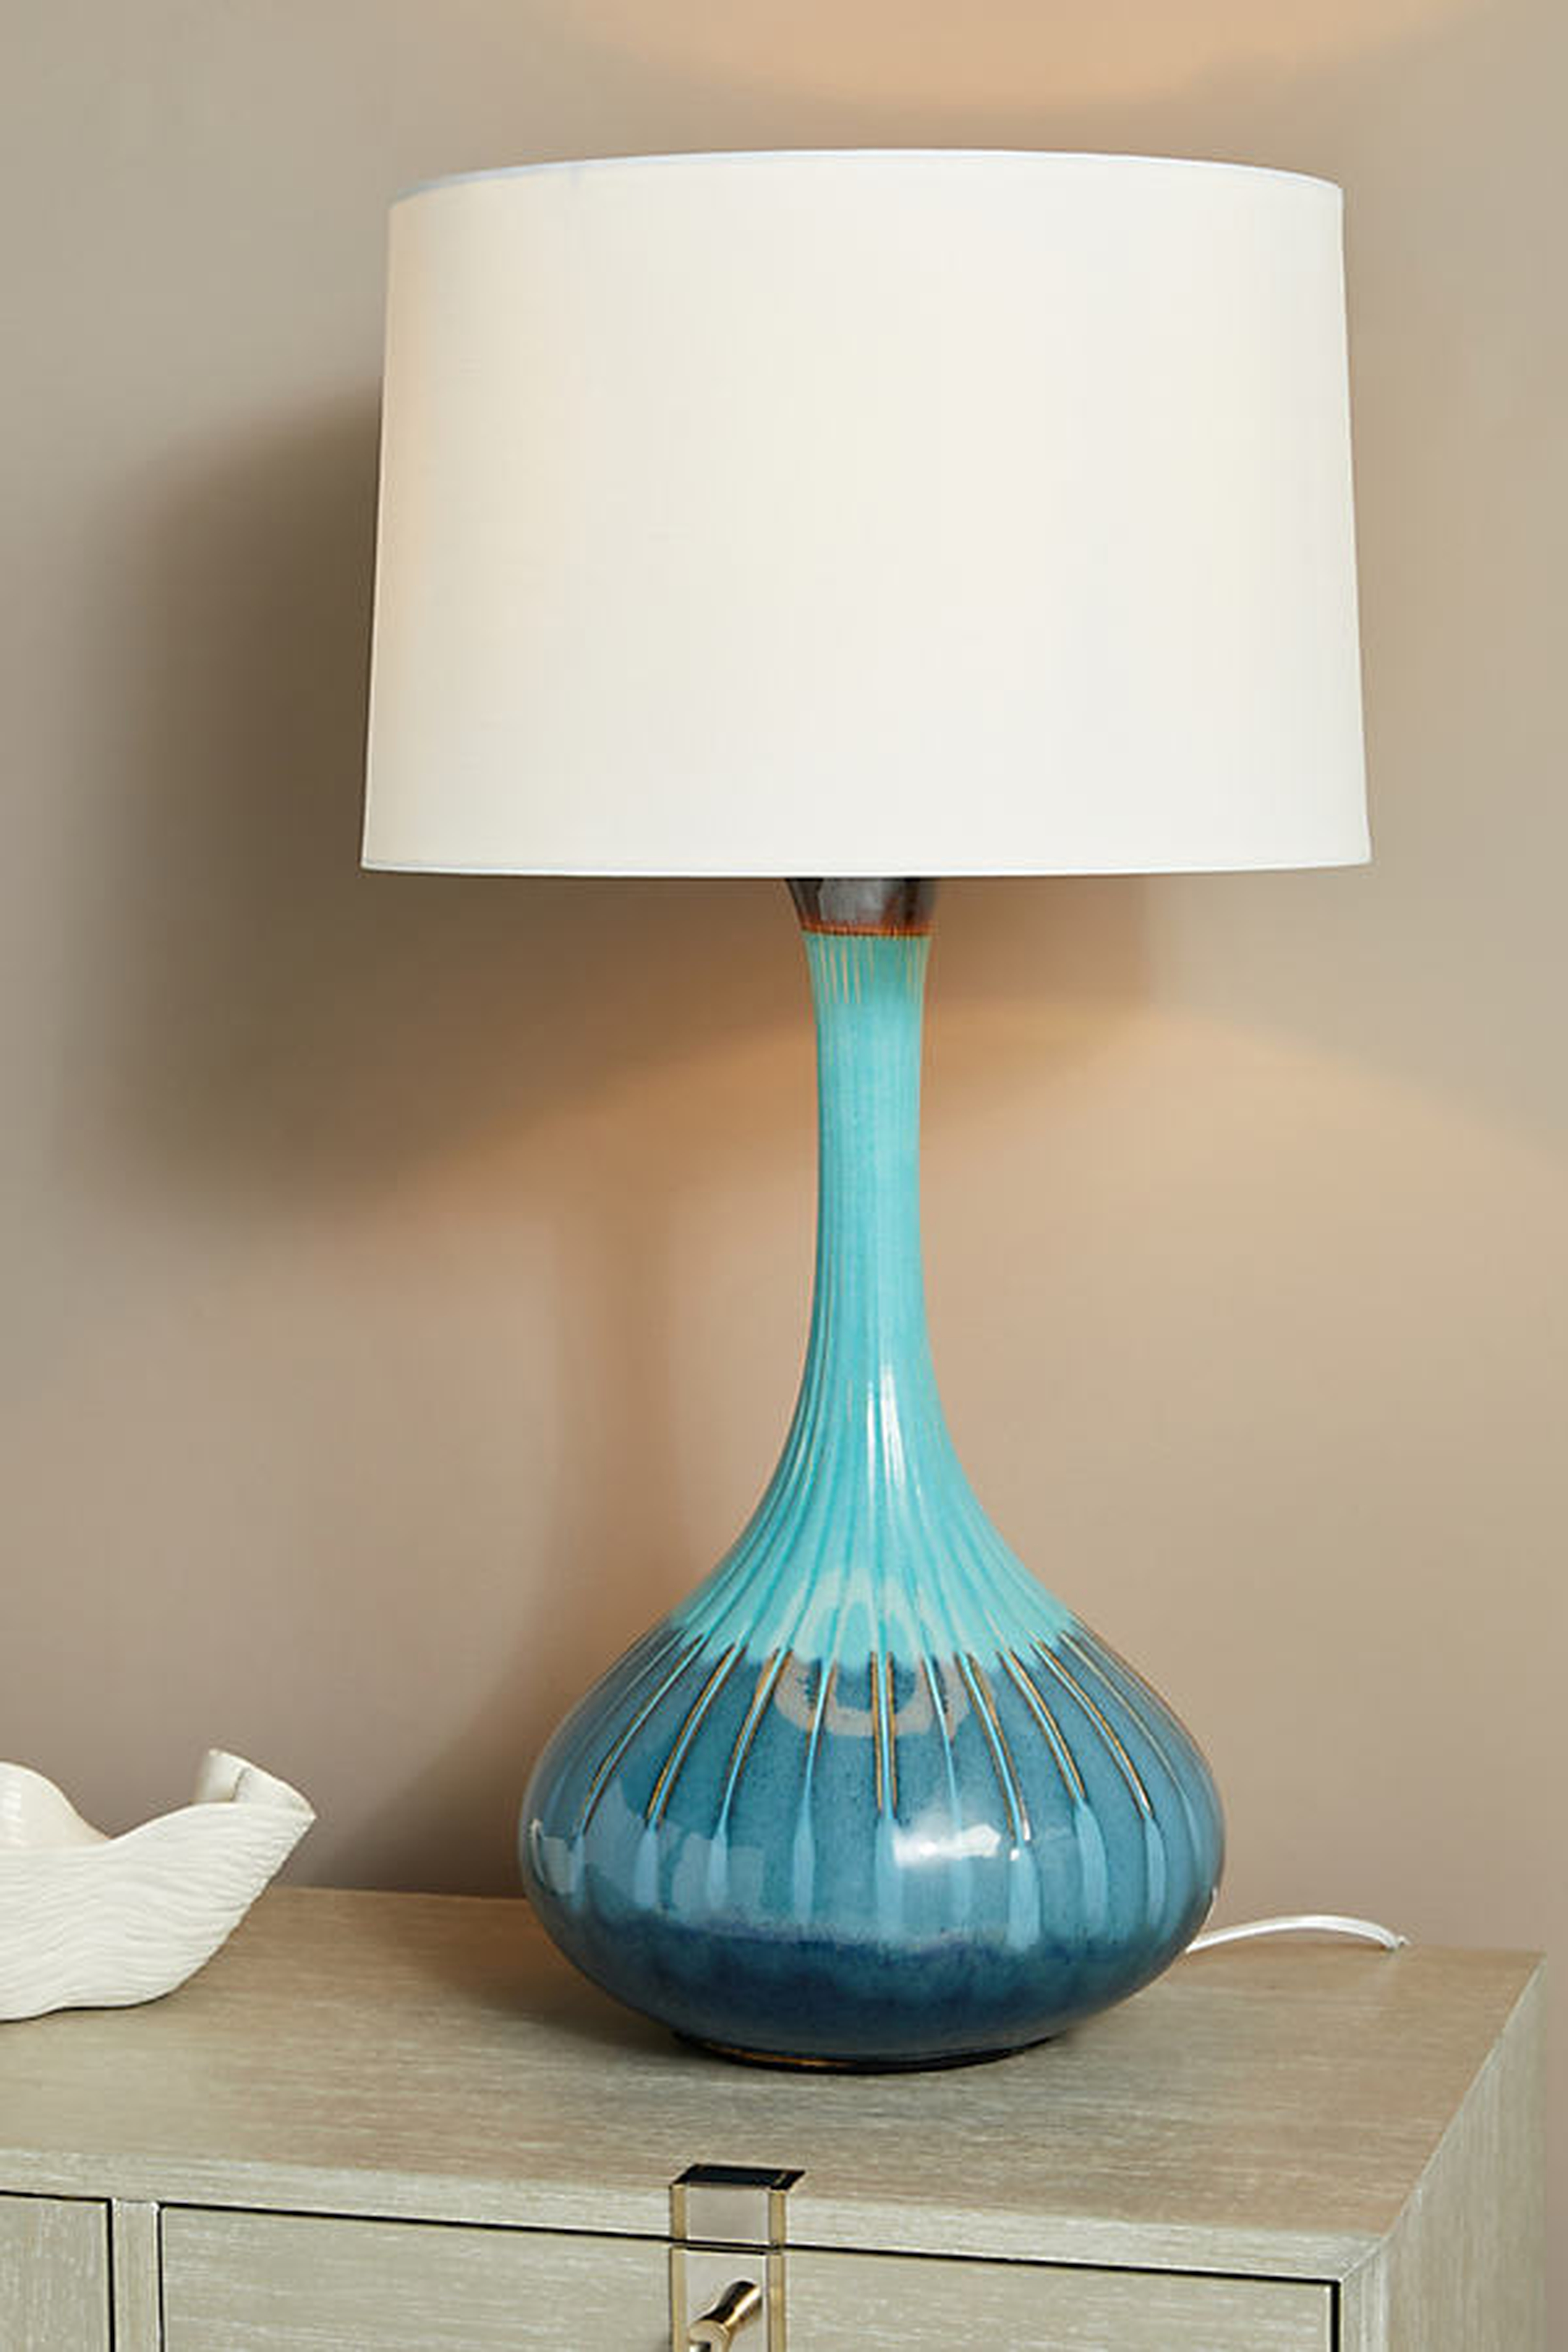 Adira Table Lamp By Anthropologie in Blue - Anthropologie